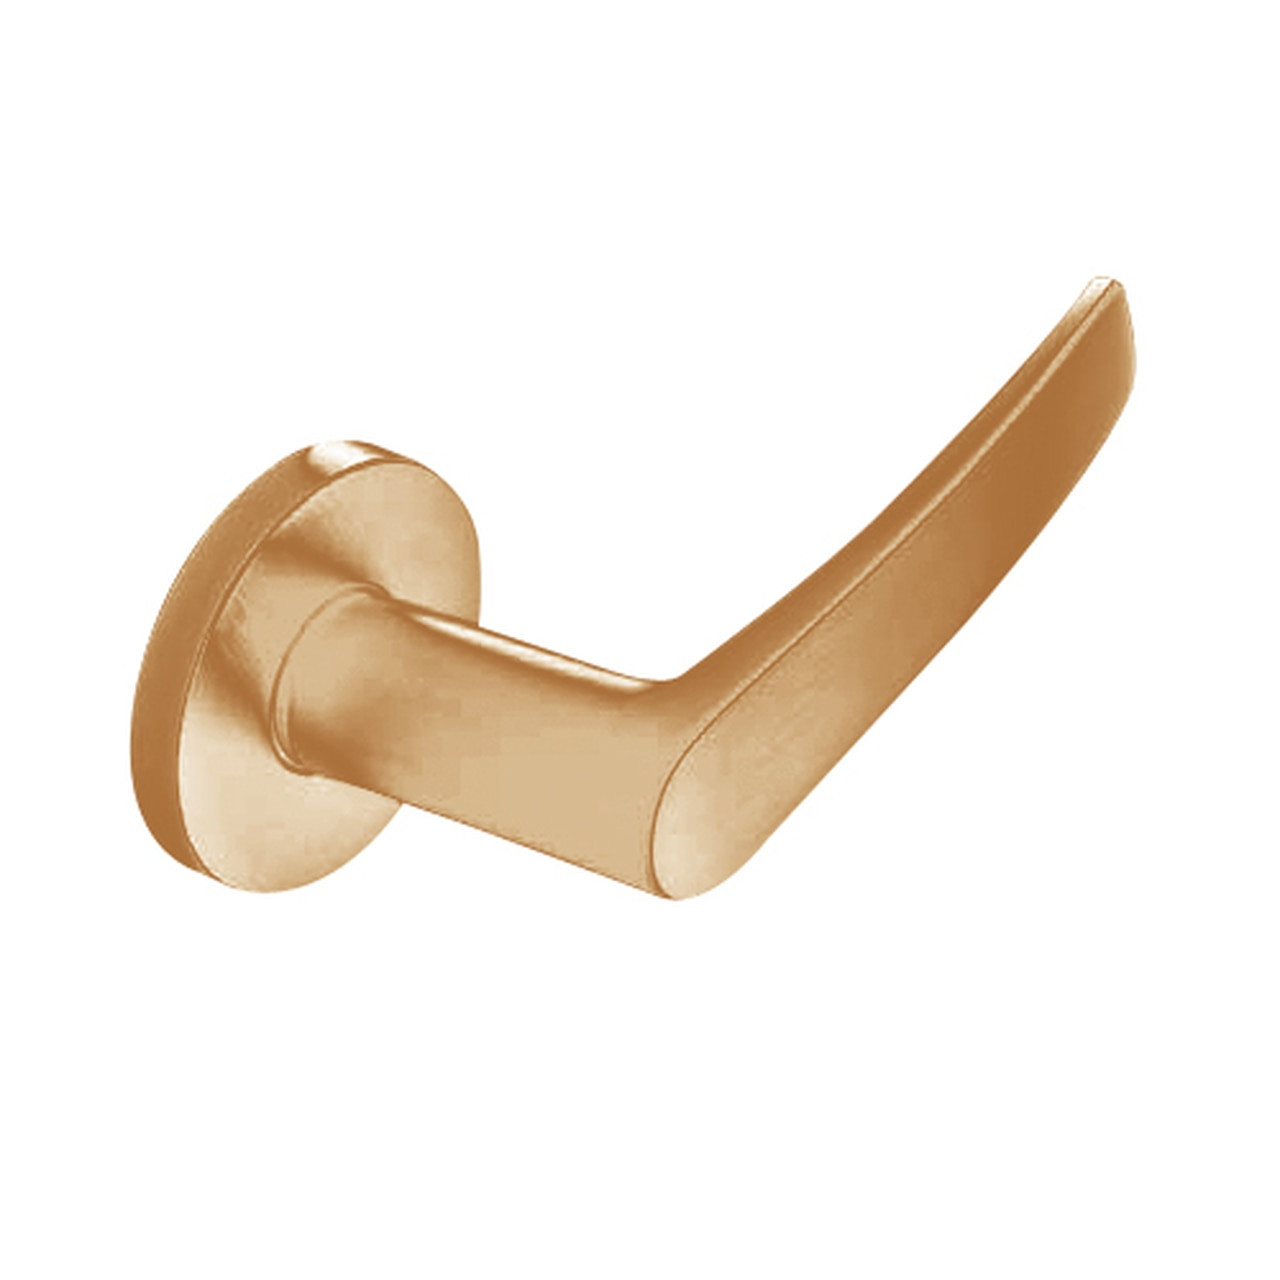 ML2057-ASF-612-M31 Corbin Russwin ML2000 Series Mortise Storeroom Trim Pack with Armstrong Lever in Satin Bronze